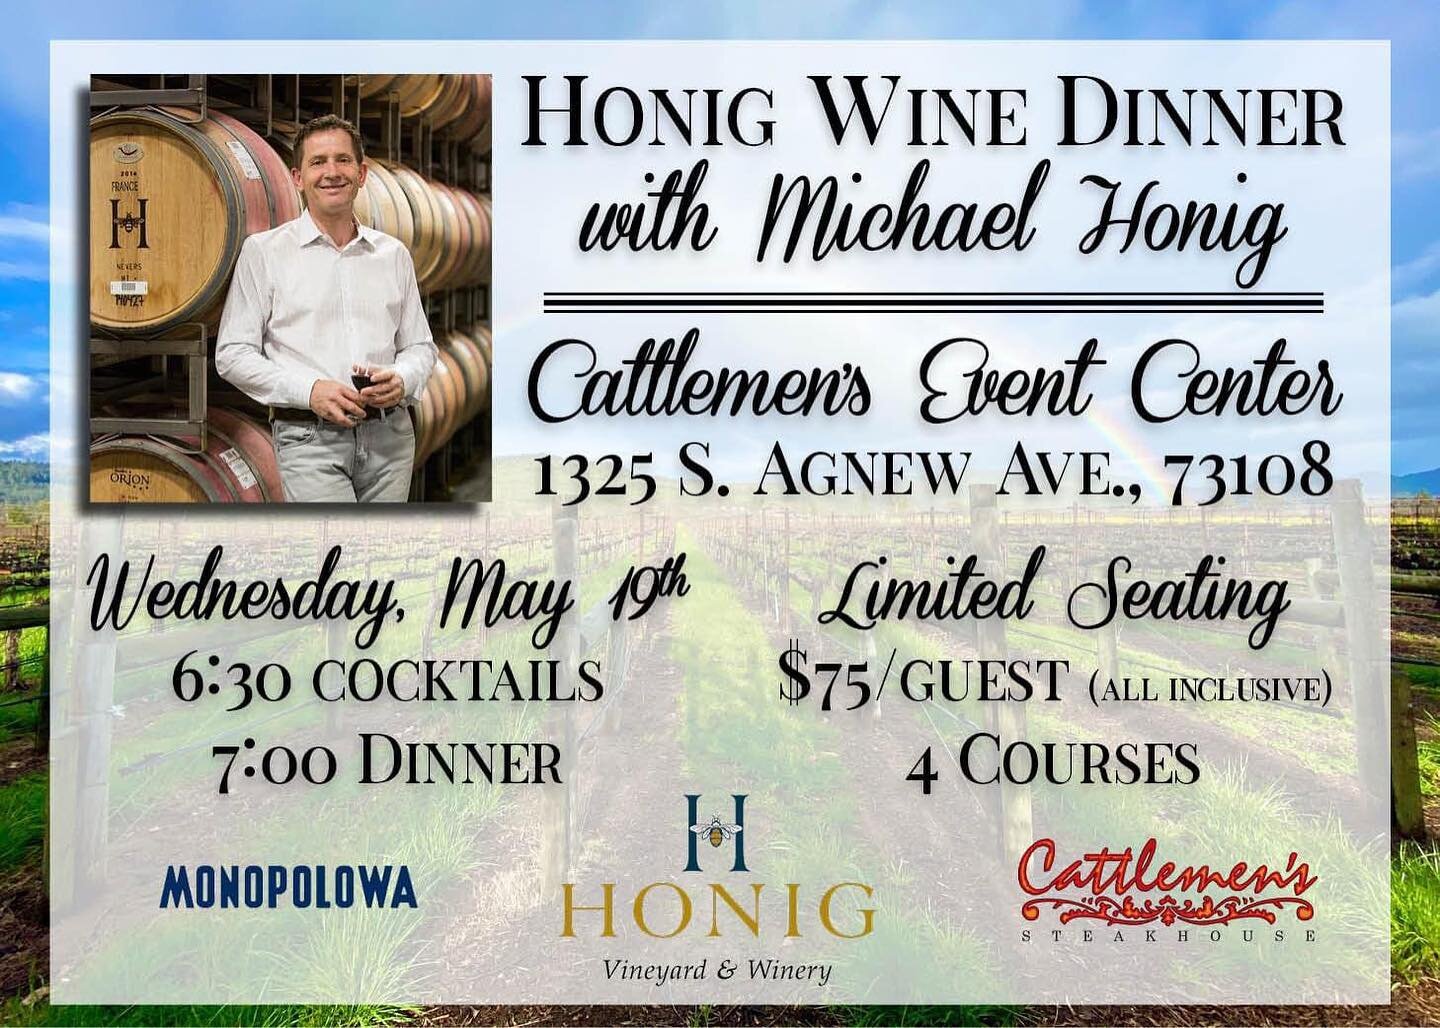 Tickets for @cattlemenssteakhouseokc Honig Wine Dinner with Michael Honig are going fast! Stop by their website and click &quot;Order Online&quot; to secure your spot before they're all gone!

https://cattlemensrestaurant.com/honig-wine-dinner